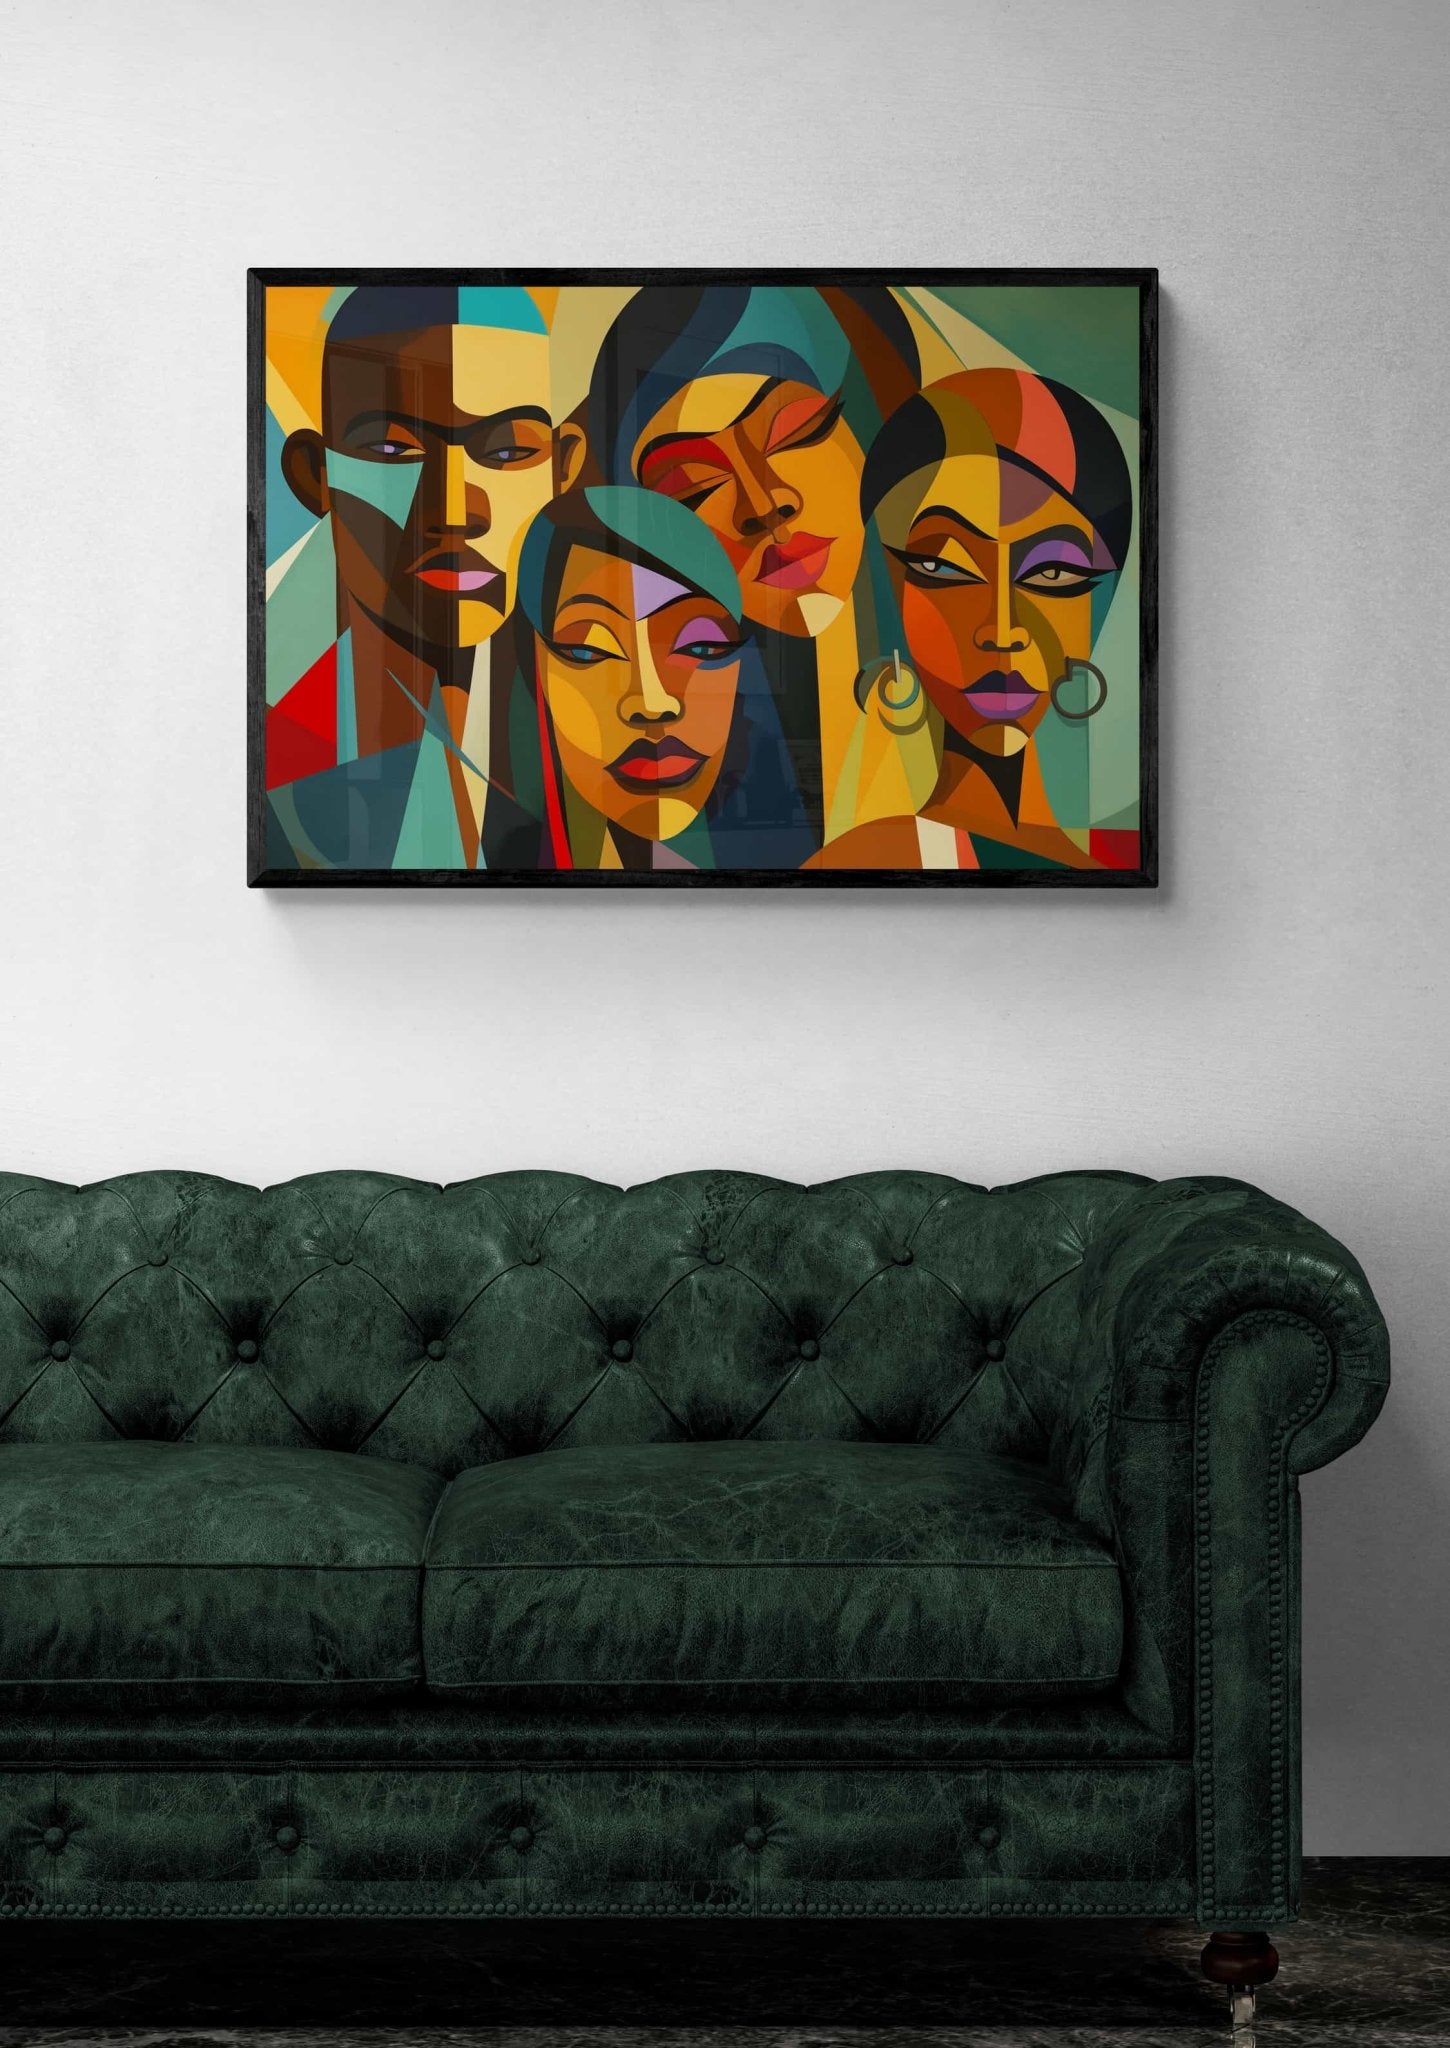 Elegant canvas print from Milton Wes Art showcasing a group of vibrant, geometrically-styled faces, above a lush green velvet sofa, from the Harlem, NYC based online retailer miltonwesart.com